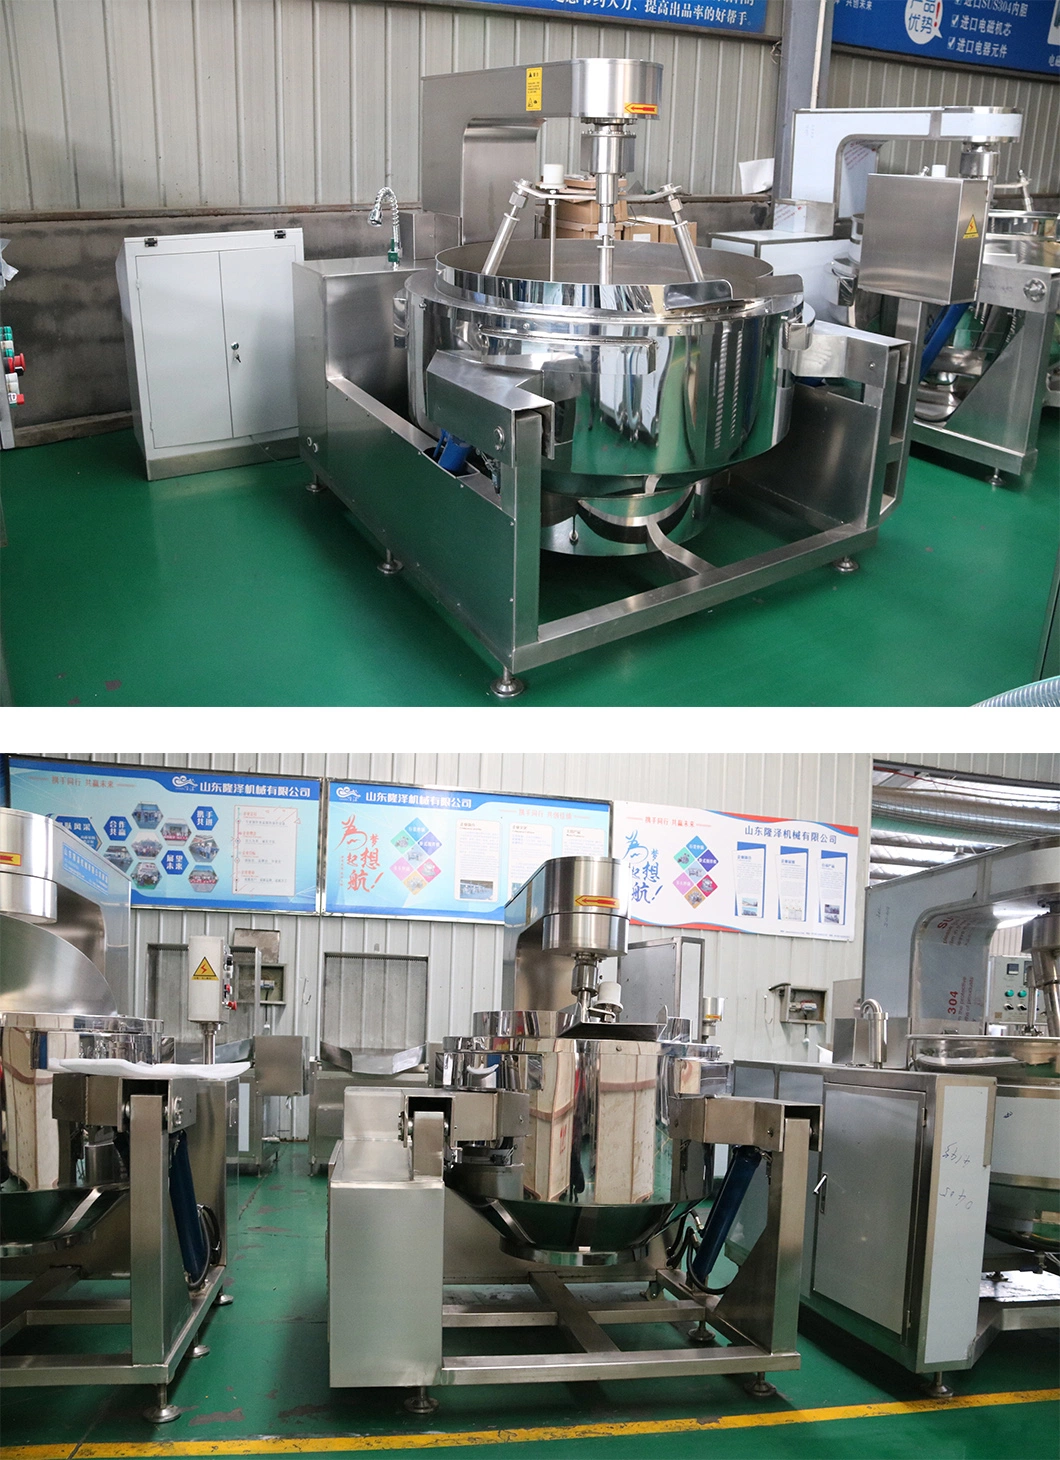 Restaurant Commercial Automatic Multi Function Planetary Tilting Curry Chili Bean Paste Mixing Making Electric Gas Steam Beef Sauce Cooking Wok